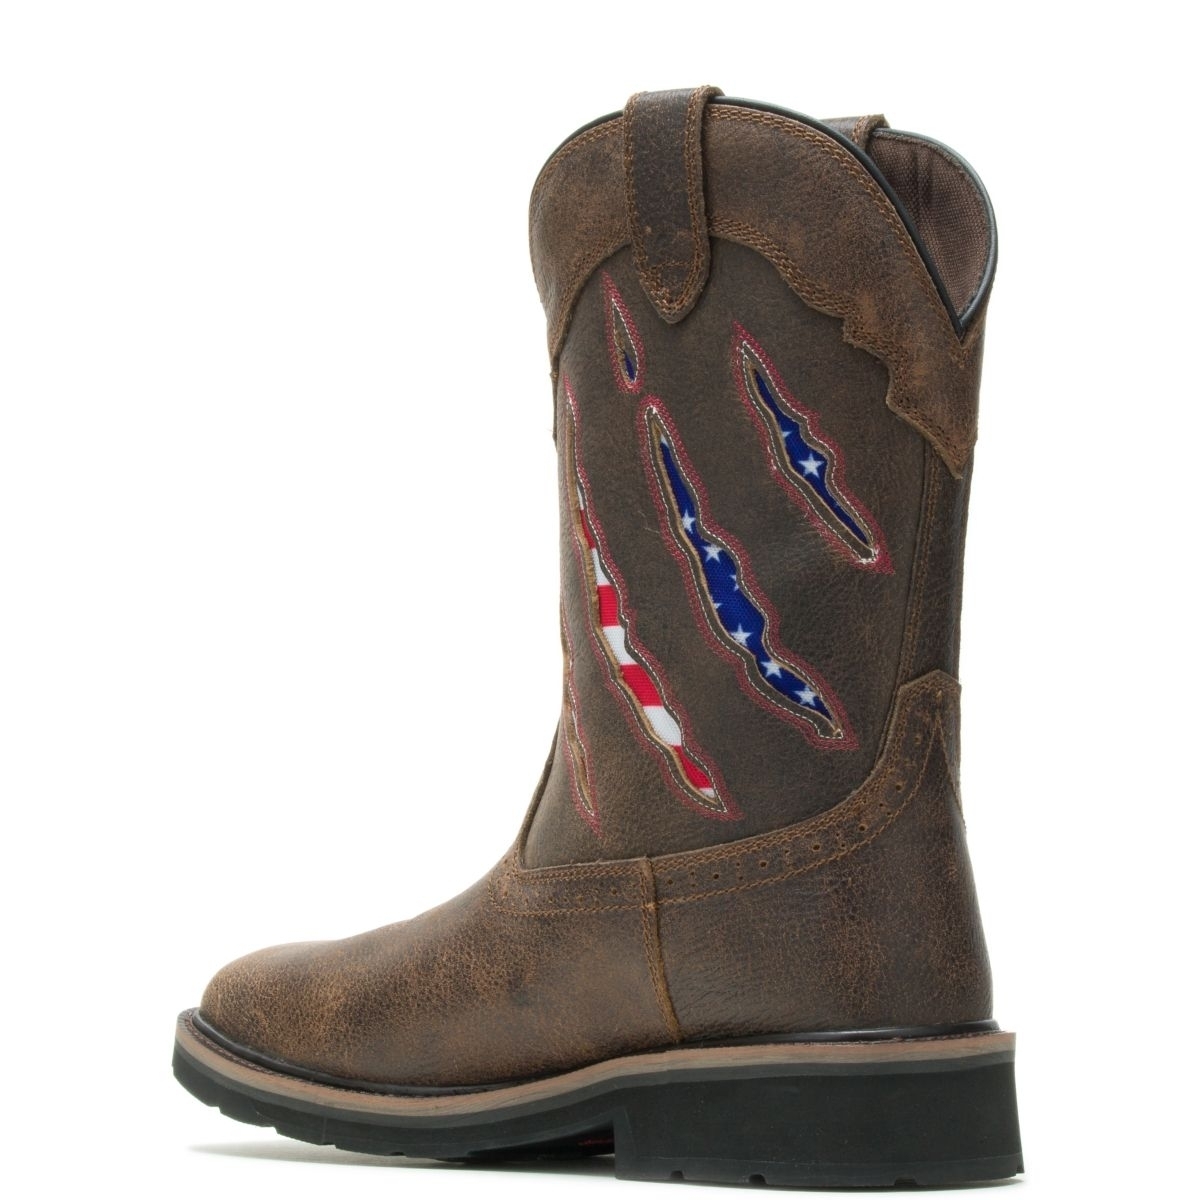 WOLVERINE Men's Rancher Claw Wellington Soft Toe Work Boot Brown/Flag - W200138 Flag/brown - Flag/brown, 8